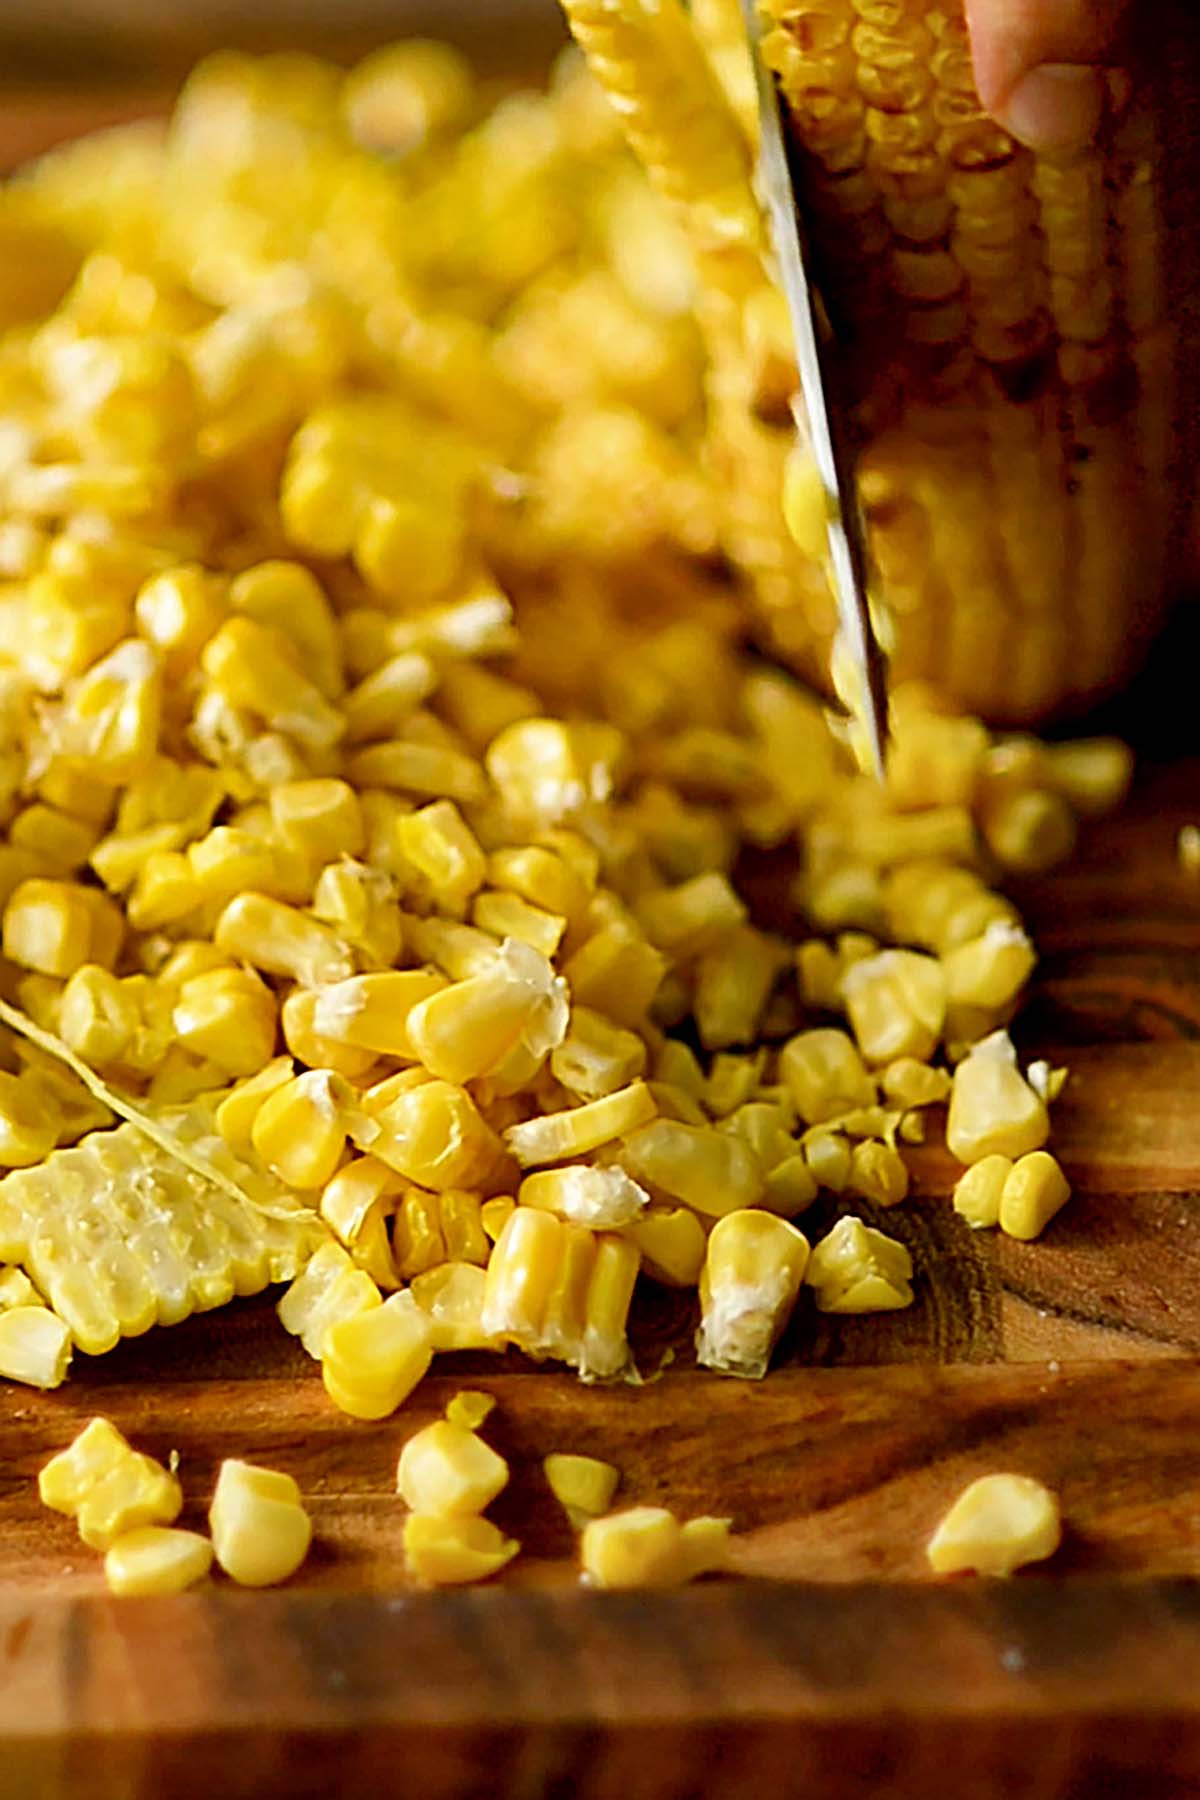 Roasted corn being sliced off the cob.